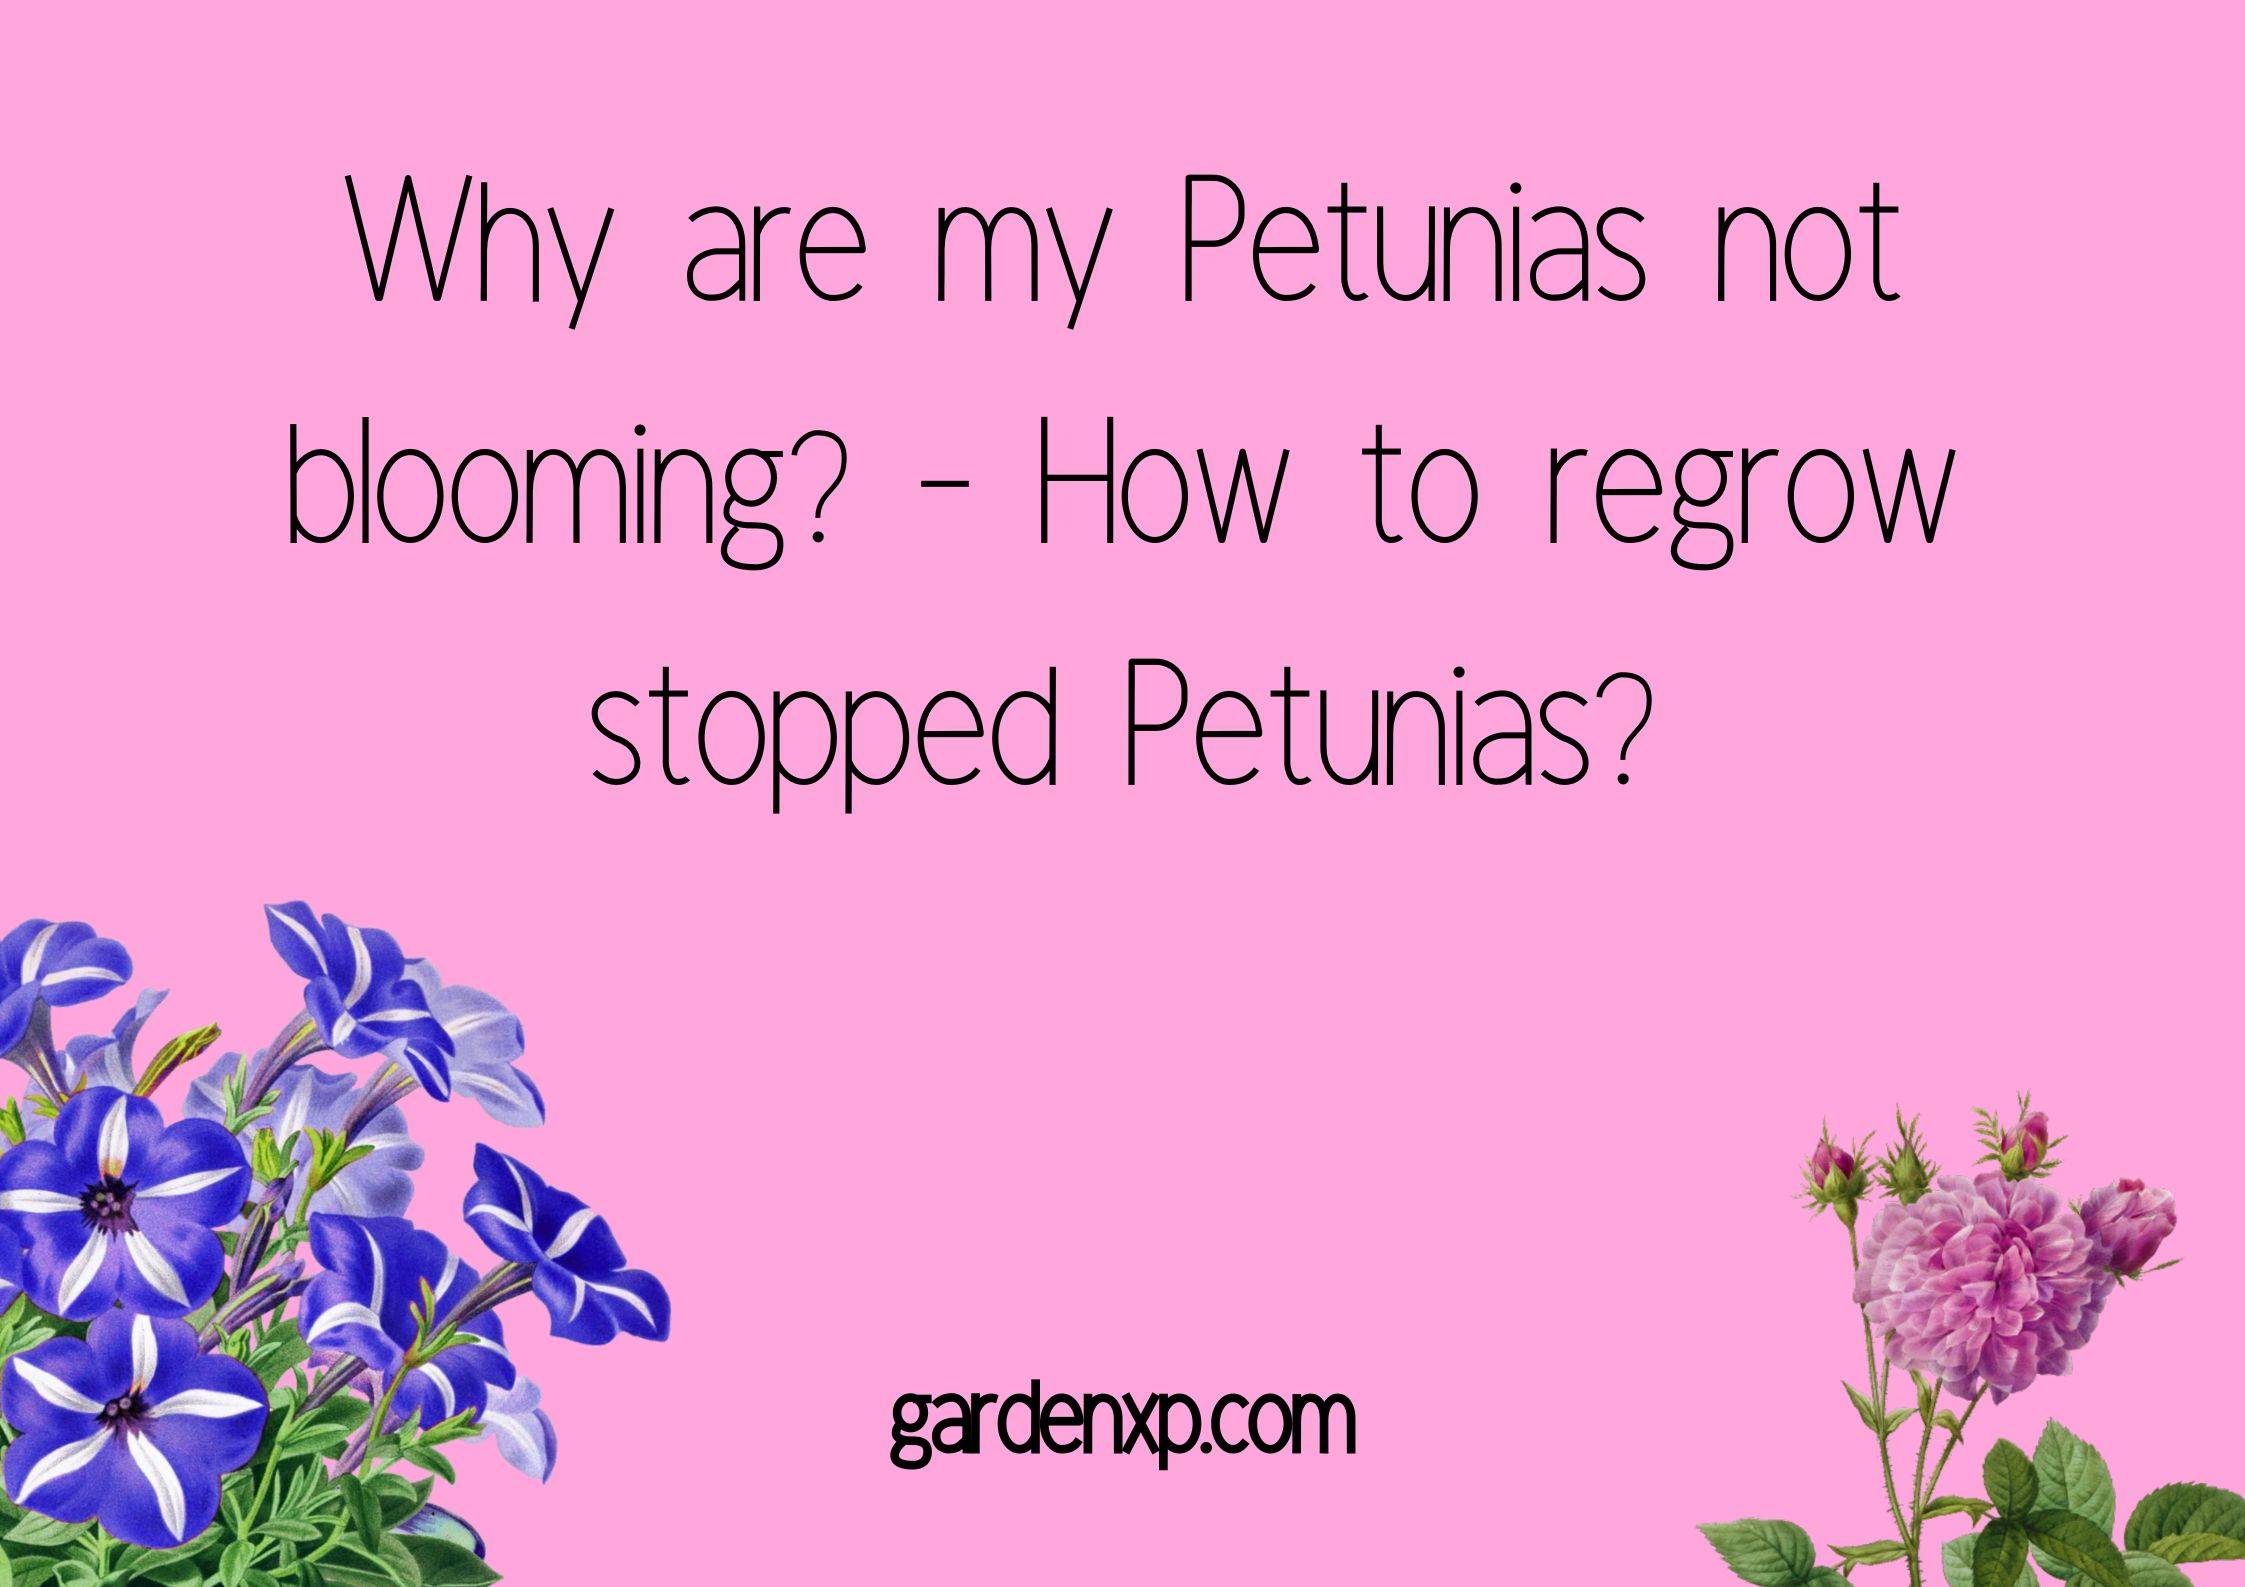 Why are my Petunias not blooming? - How to regrow stopped Petunias?